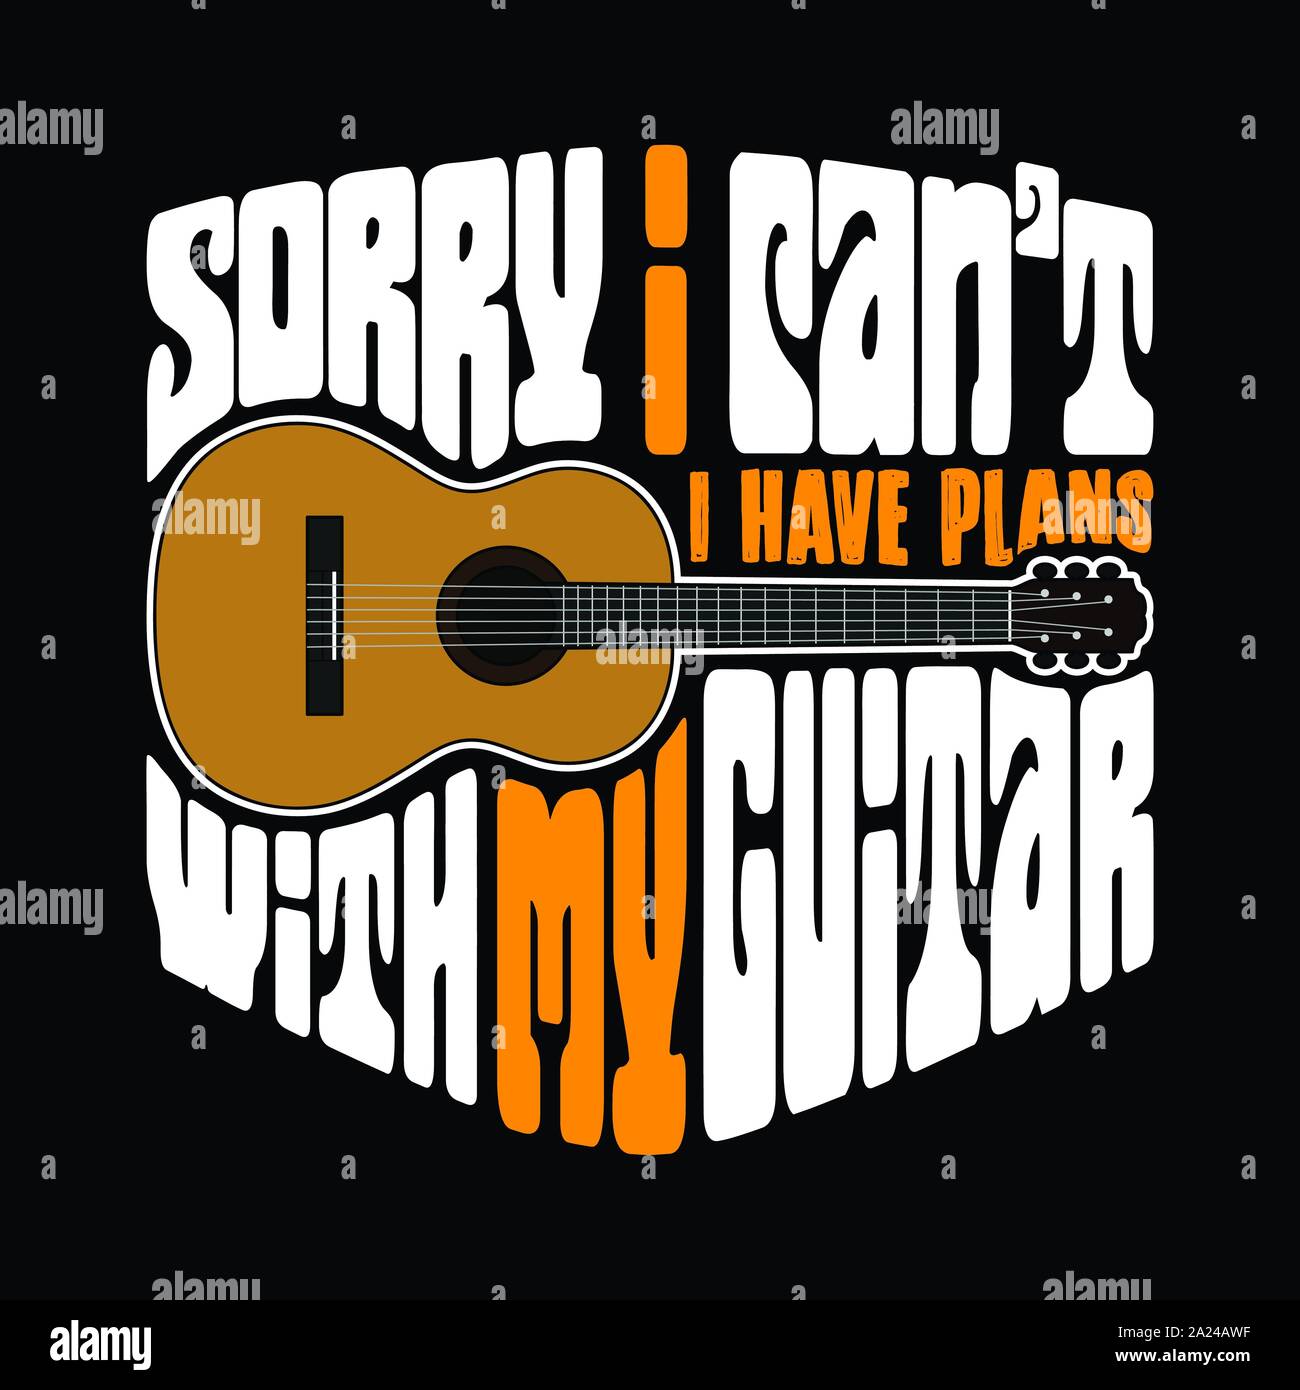 Guitar Quotes and Slogan good for T-Shirt Design. Sorry I can not I have plans with my guitar. guitar vector illustration. Stock Vector